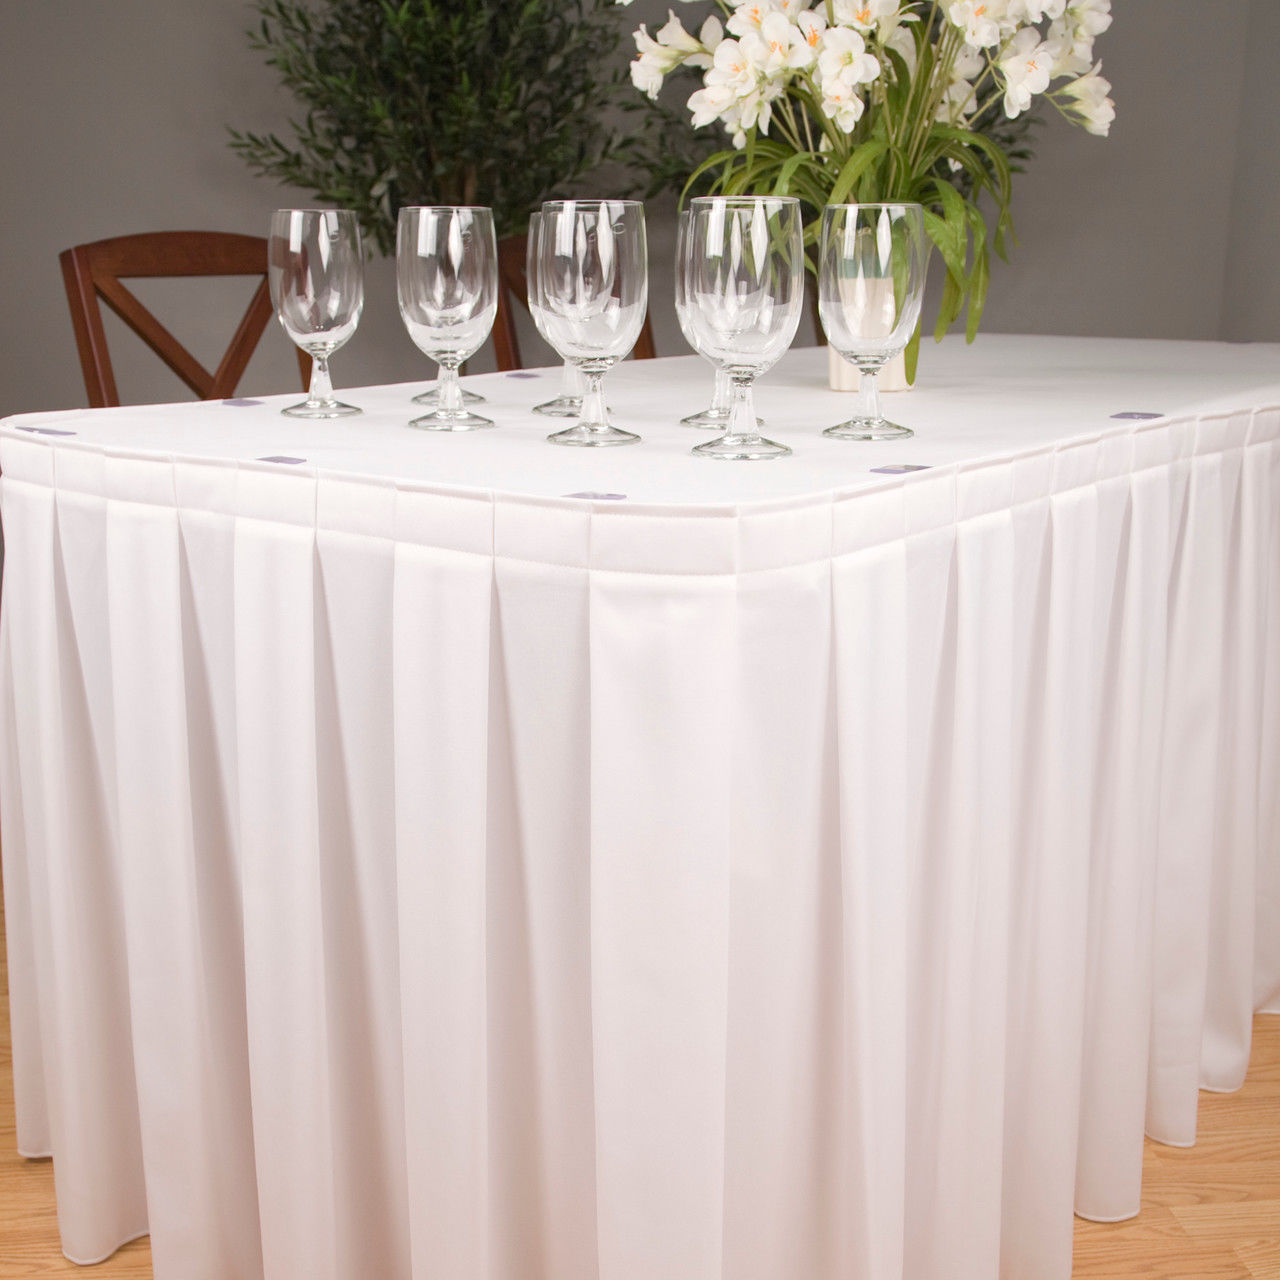 Are these table skirts flame retardant?